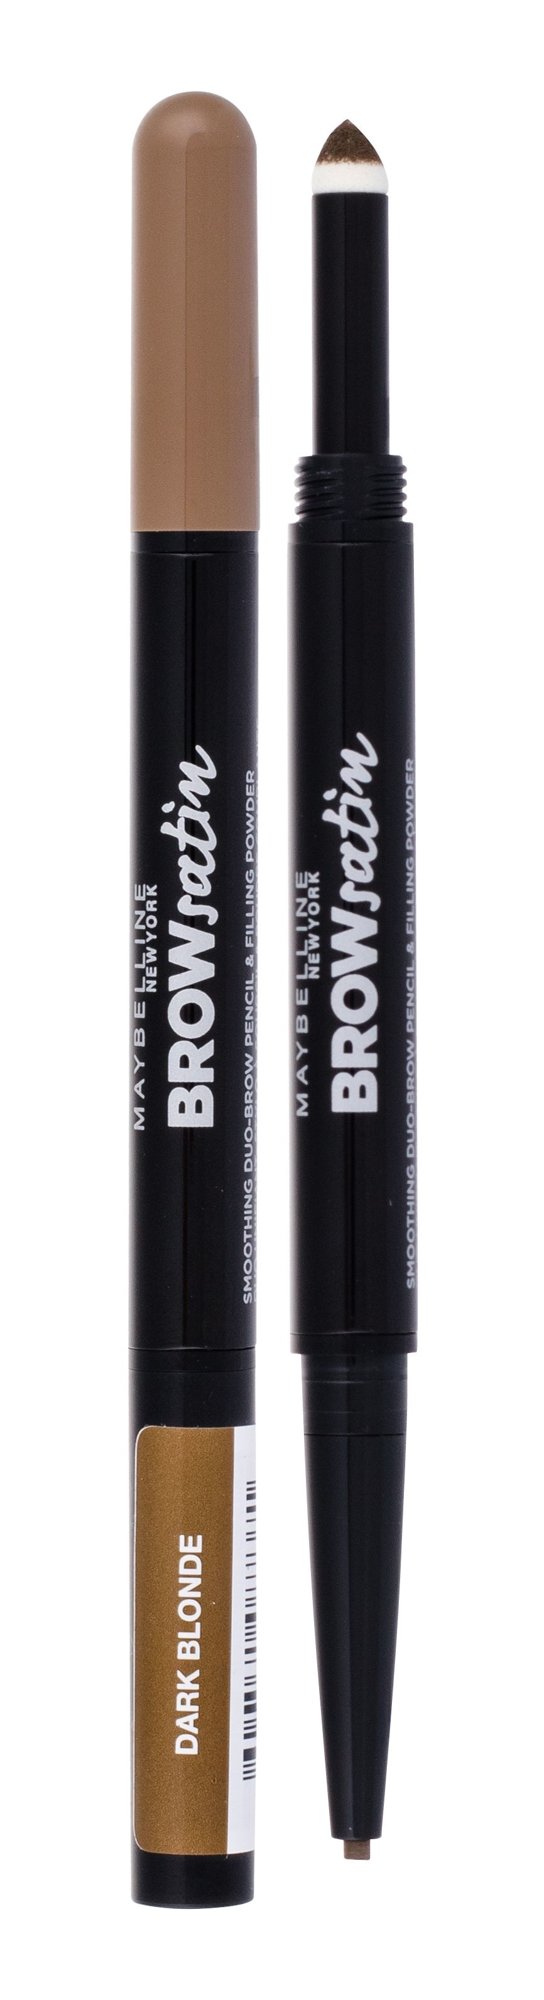 Maybelline Brow Satin Duo Brow Pencil & Filling Powder